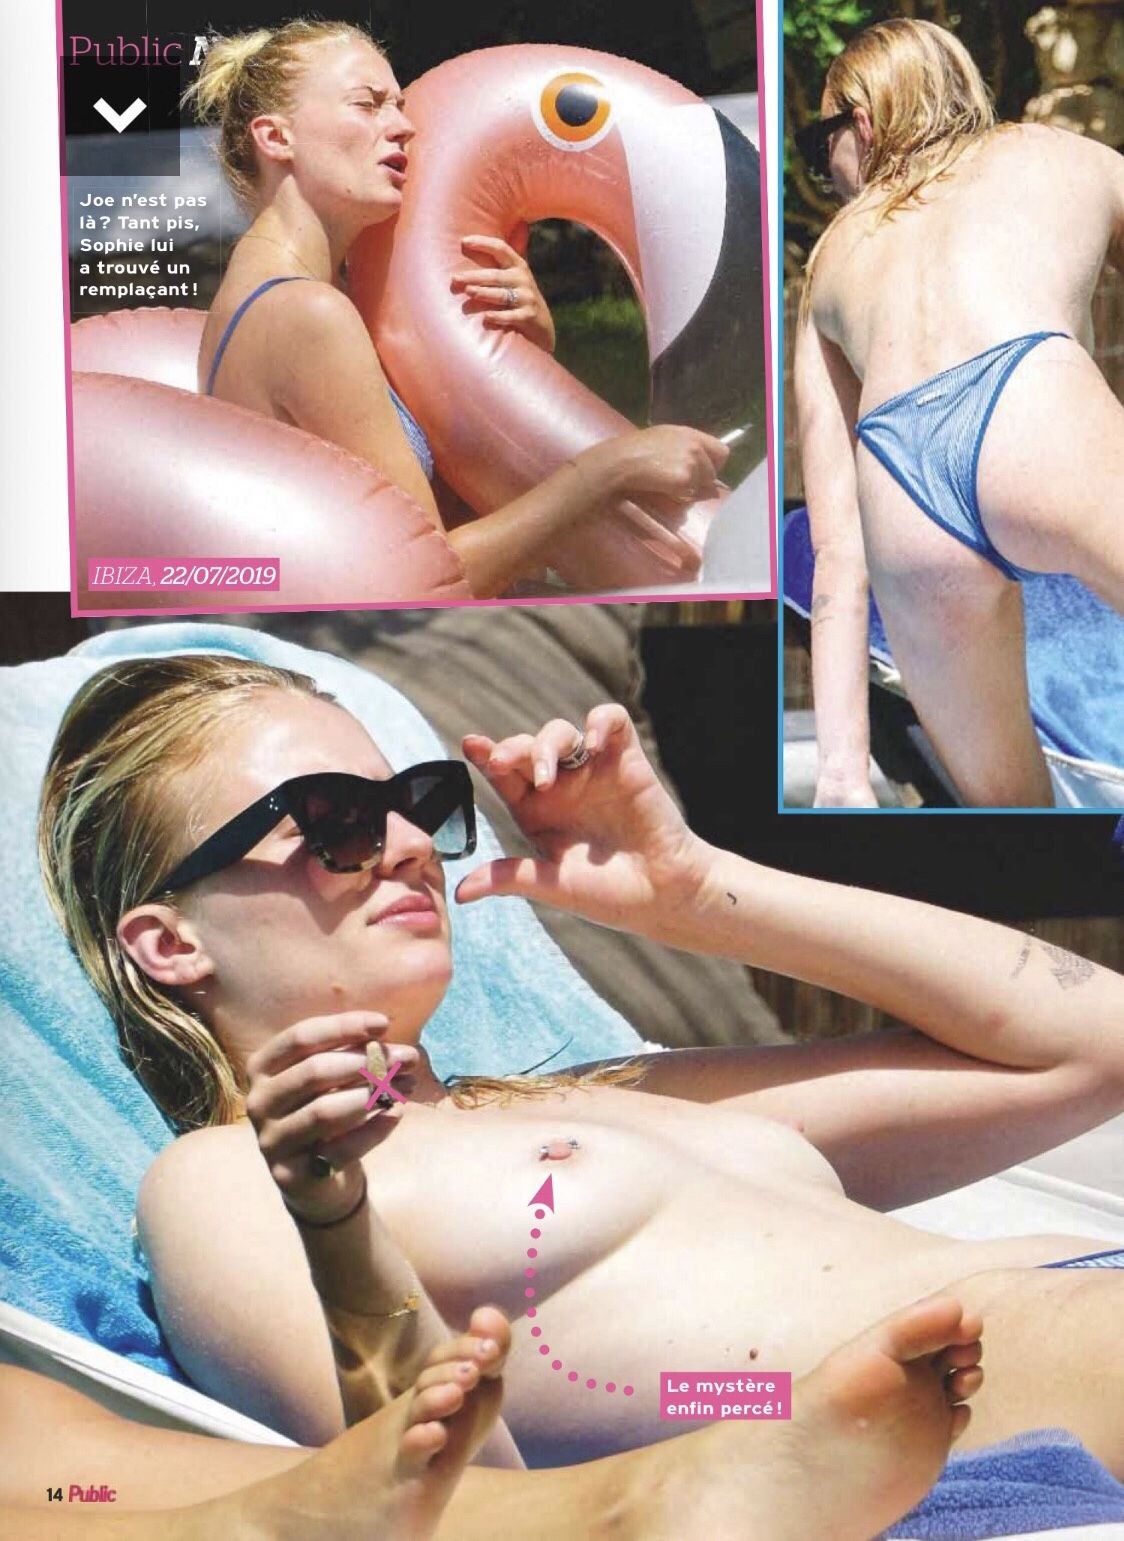 Sophie Turner Nude TheFappening.Pro 7 - Sophie Turner Topless in Public Magazine